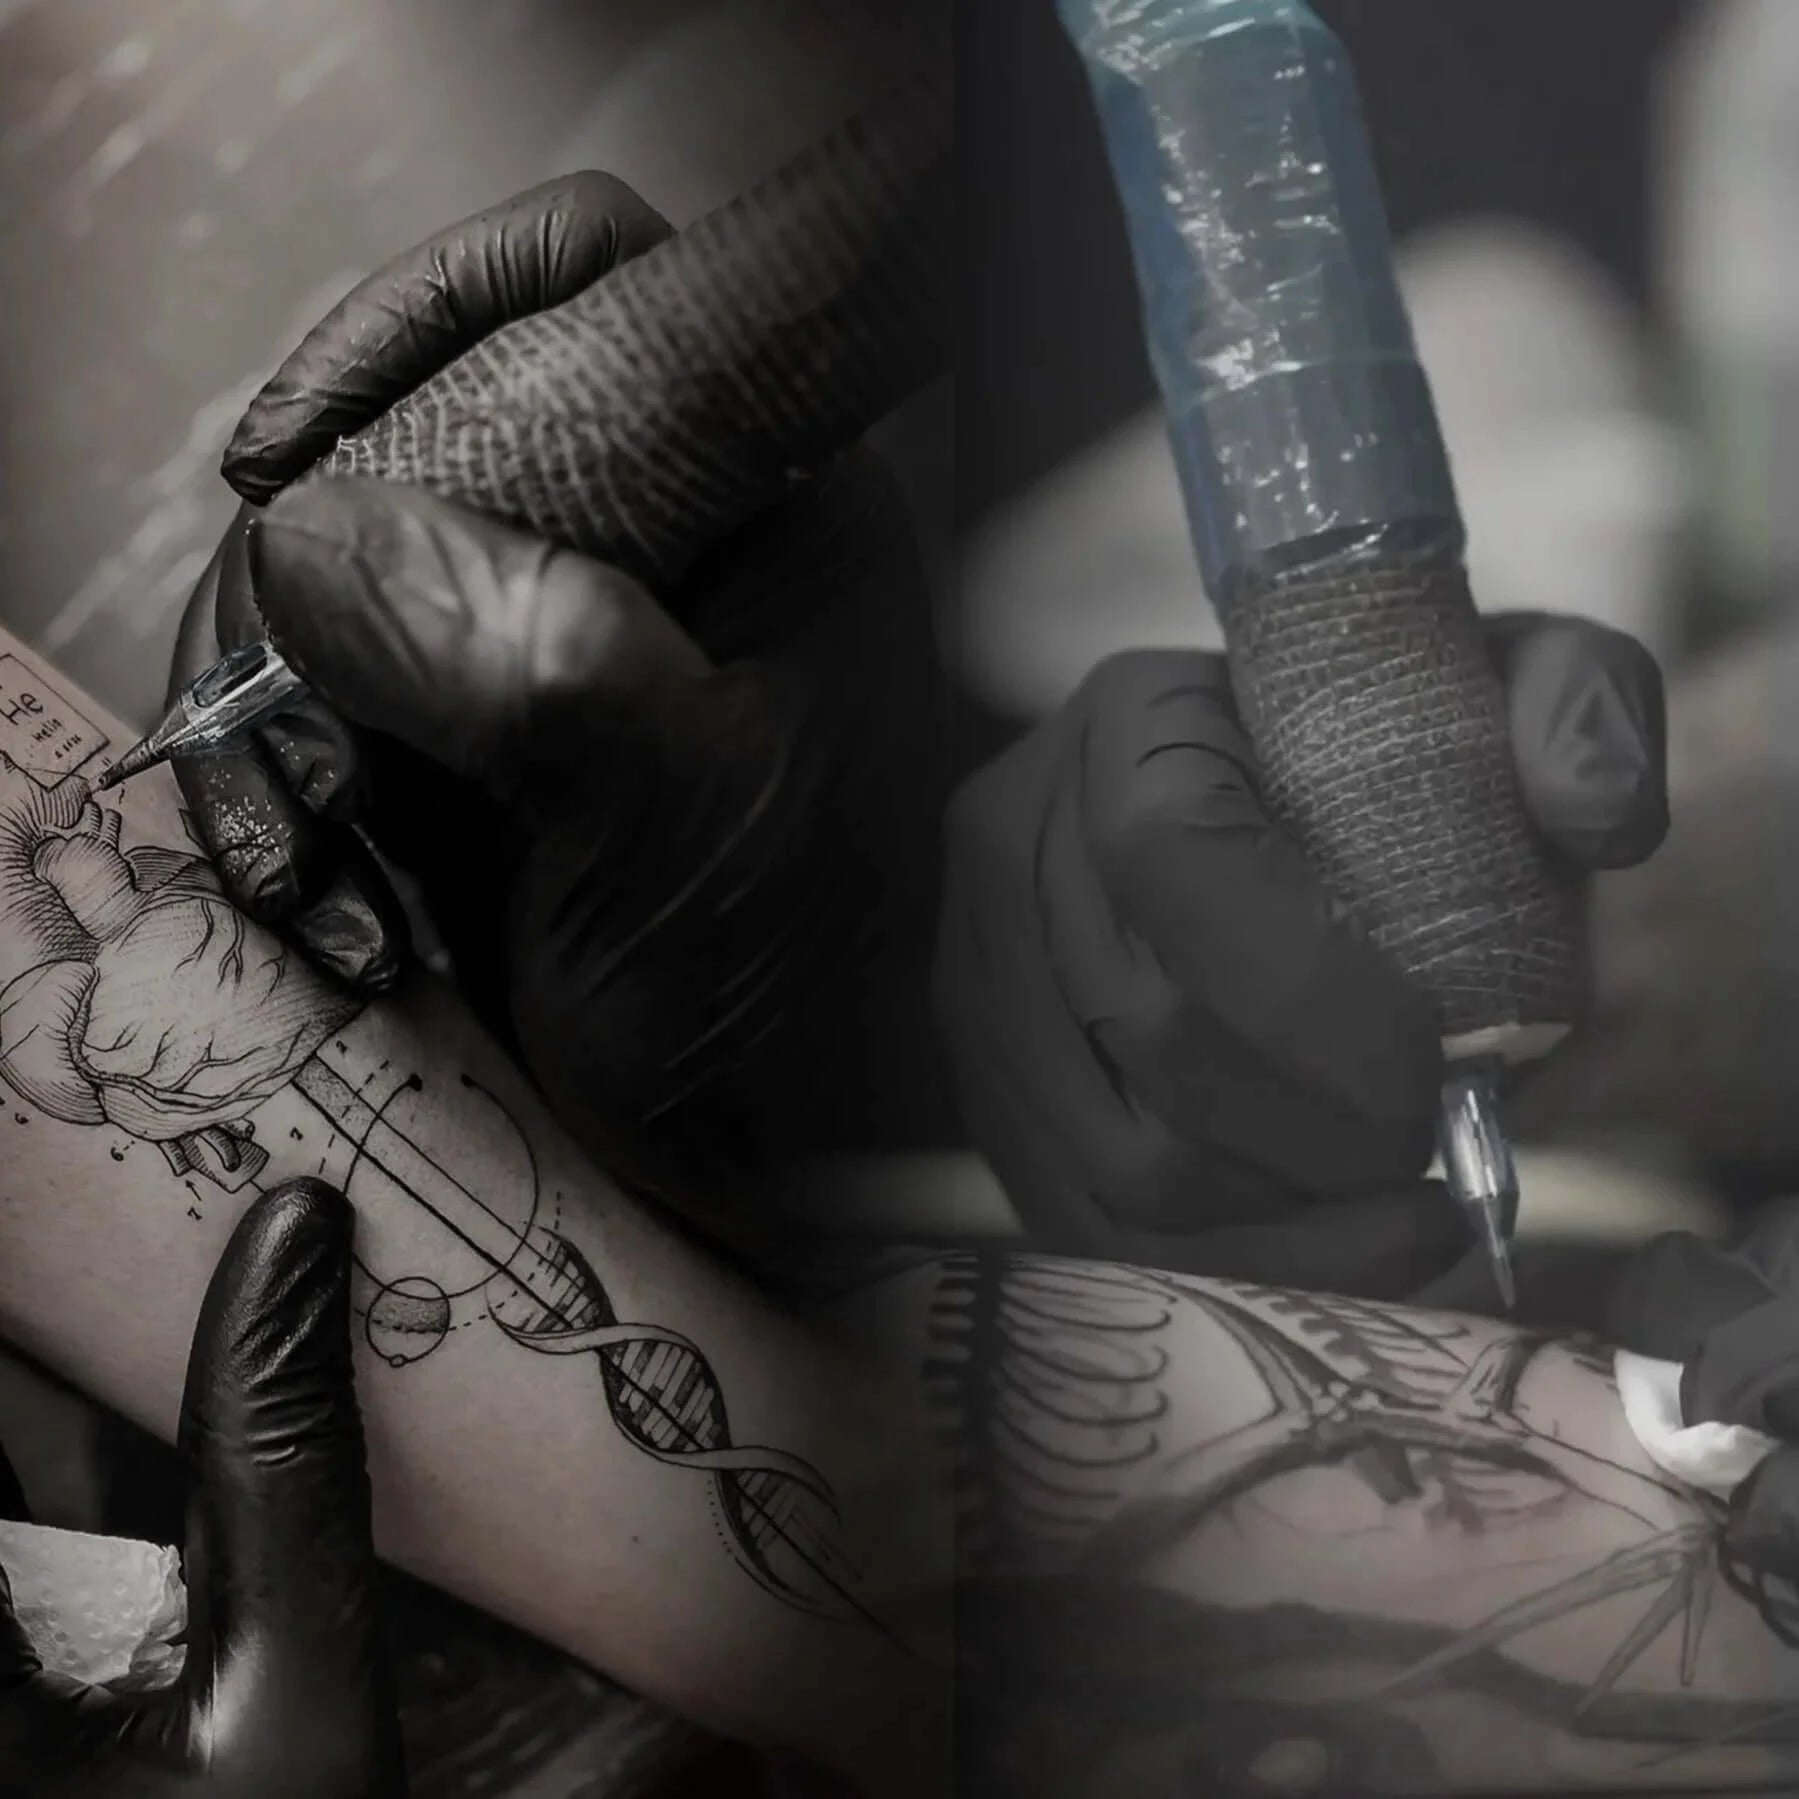 A fantastic tattoo artwork is made by Emalla products